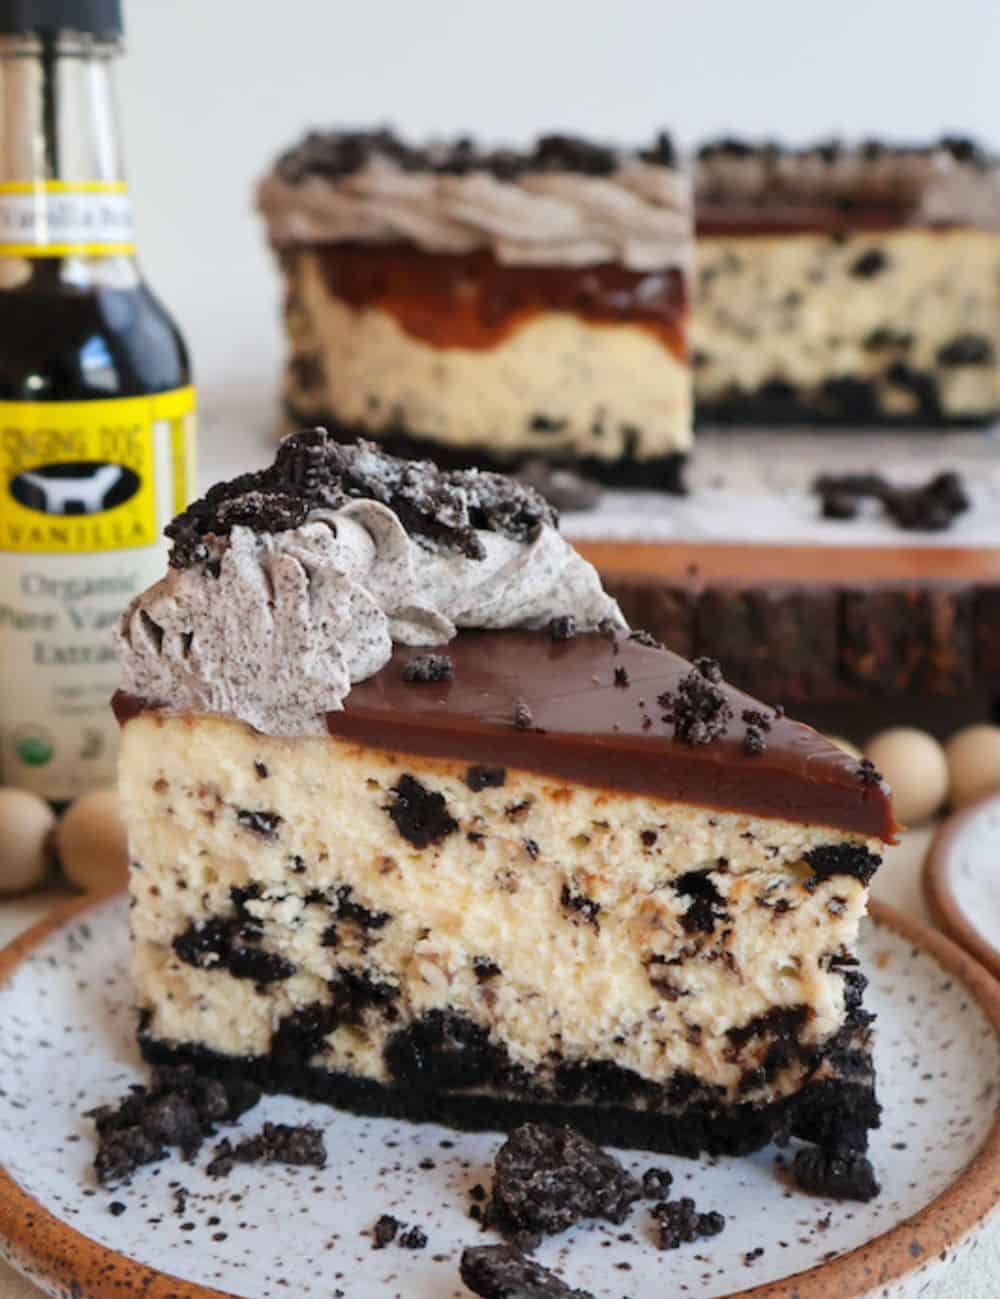 Oreo Cheesecake piece in a white/brown plate